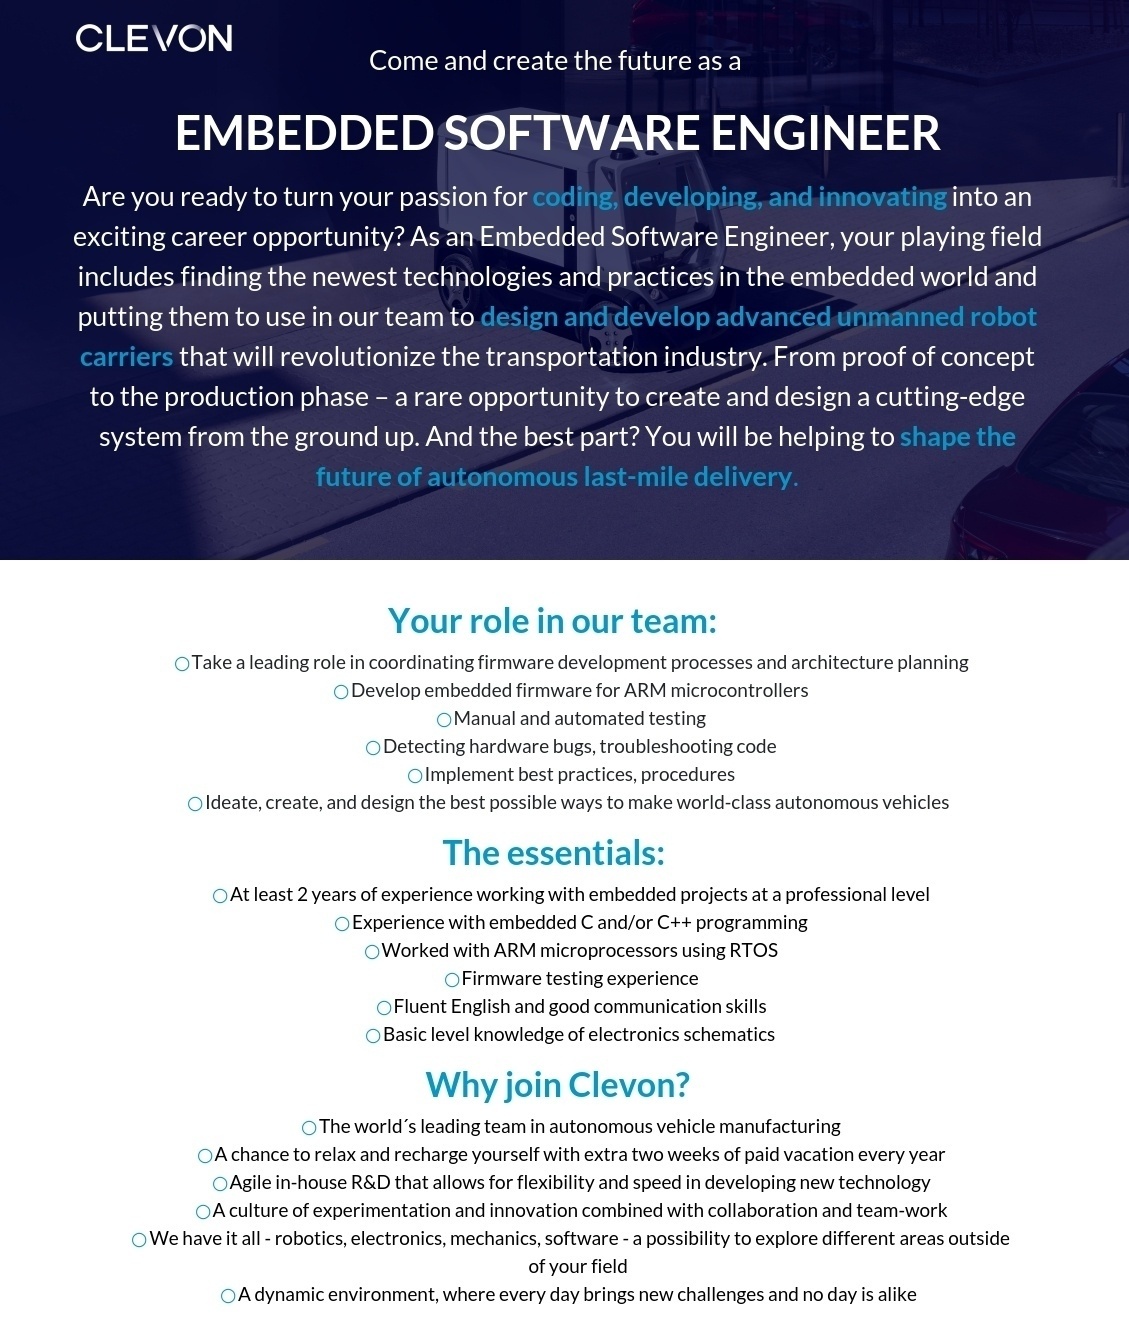 Clevon AS Embedded Software Engineer